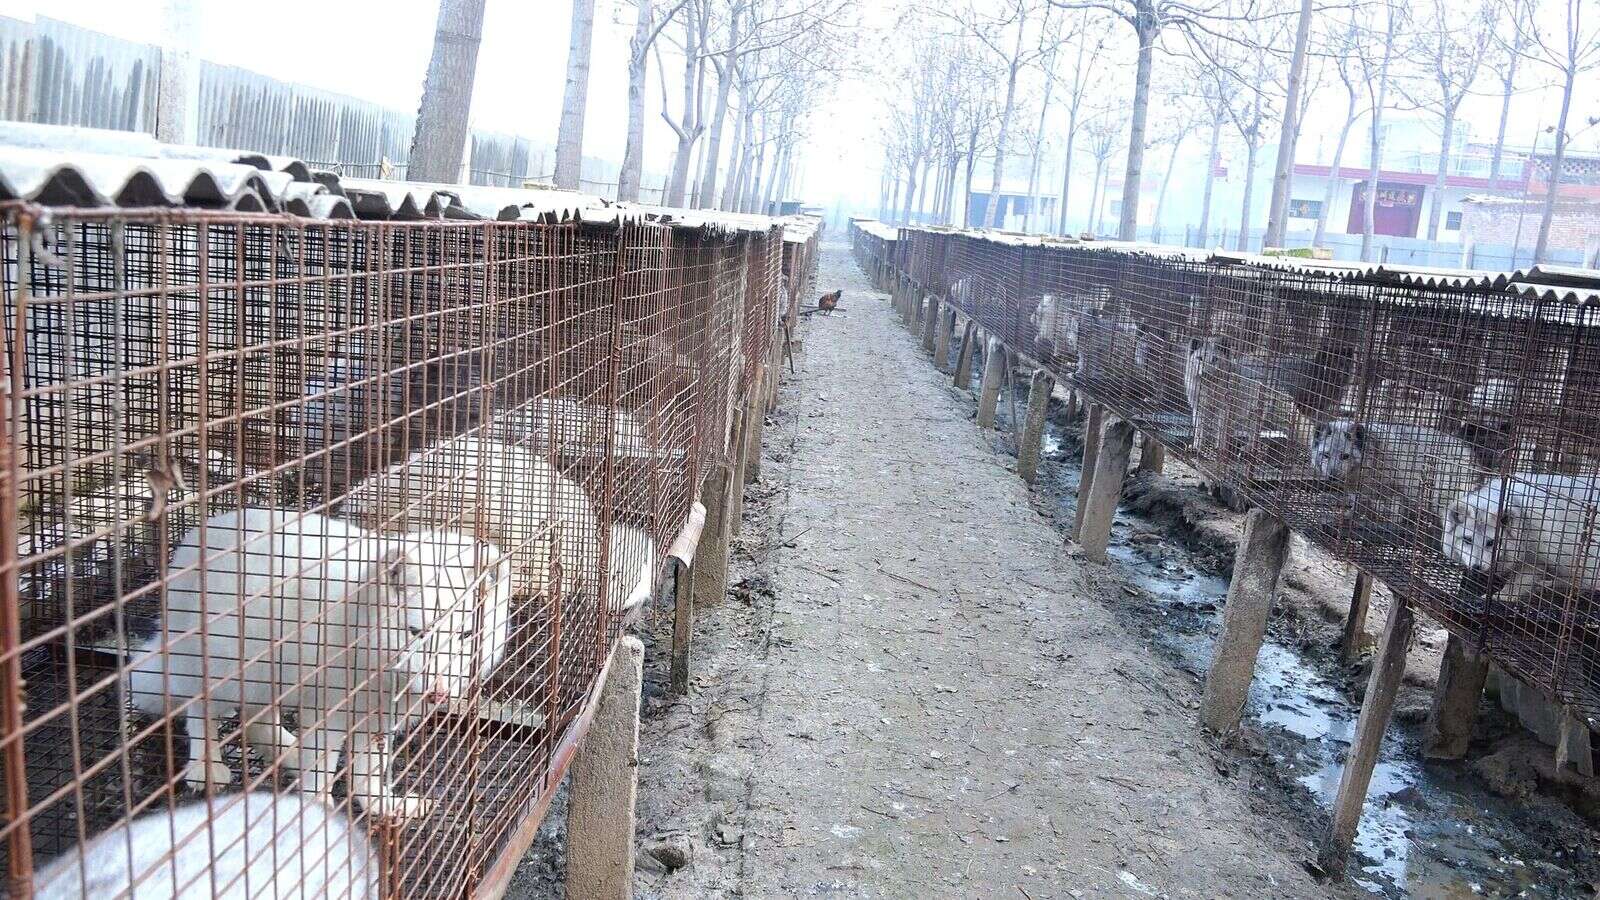 Animals in cages at fur farm